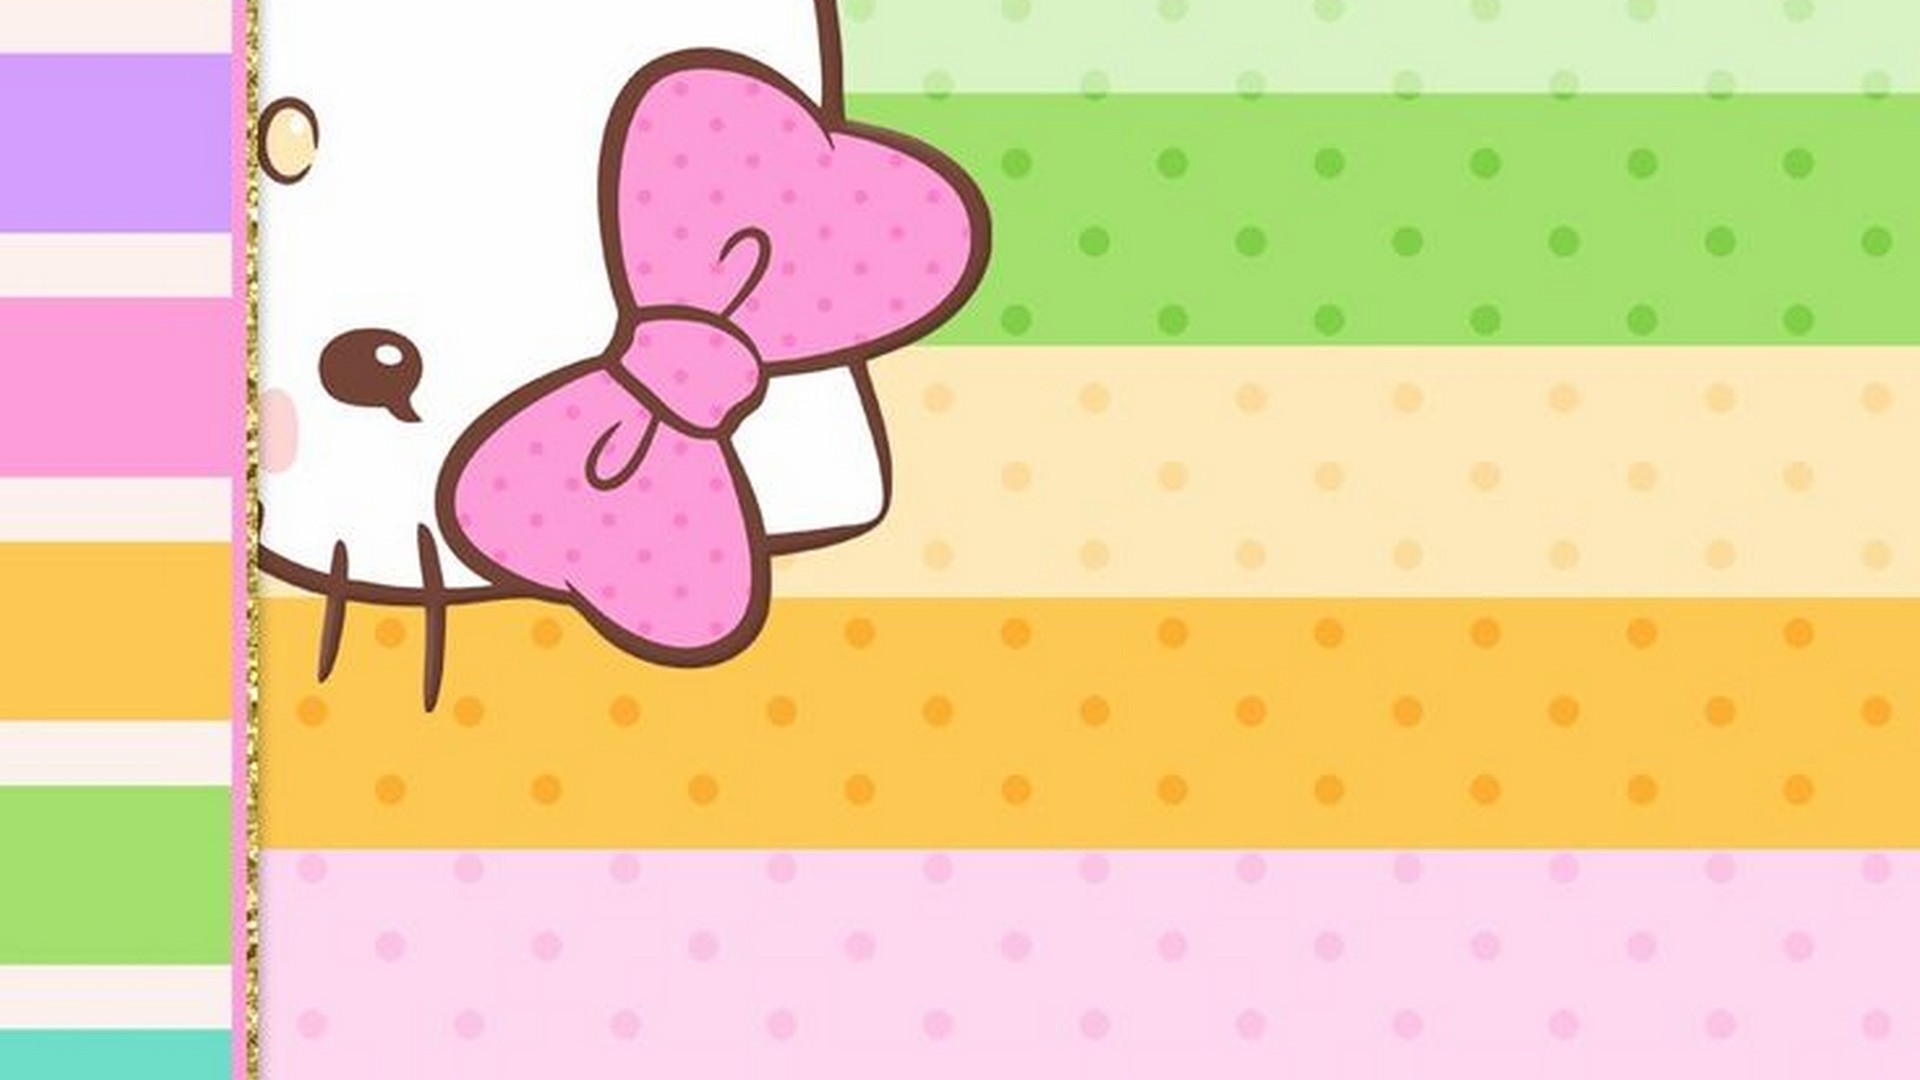 Hello Kitty HD Wallpaper With Resolution 1920X1080 pixel. You can make this wallpaper for your Desktop Computer Backgrounds, Mac Wallpapers, Android Lock screen or iPhone Screensavers